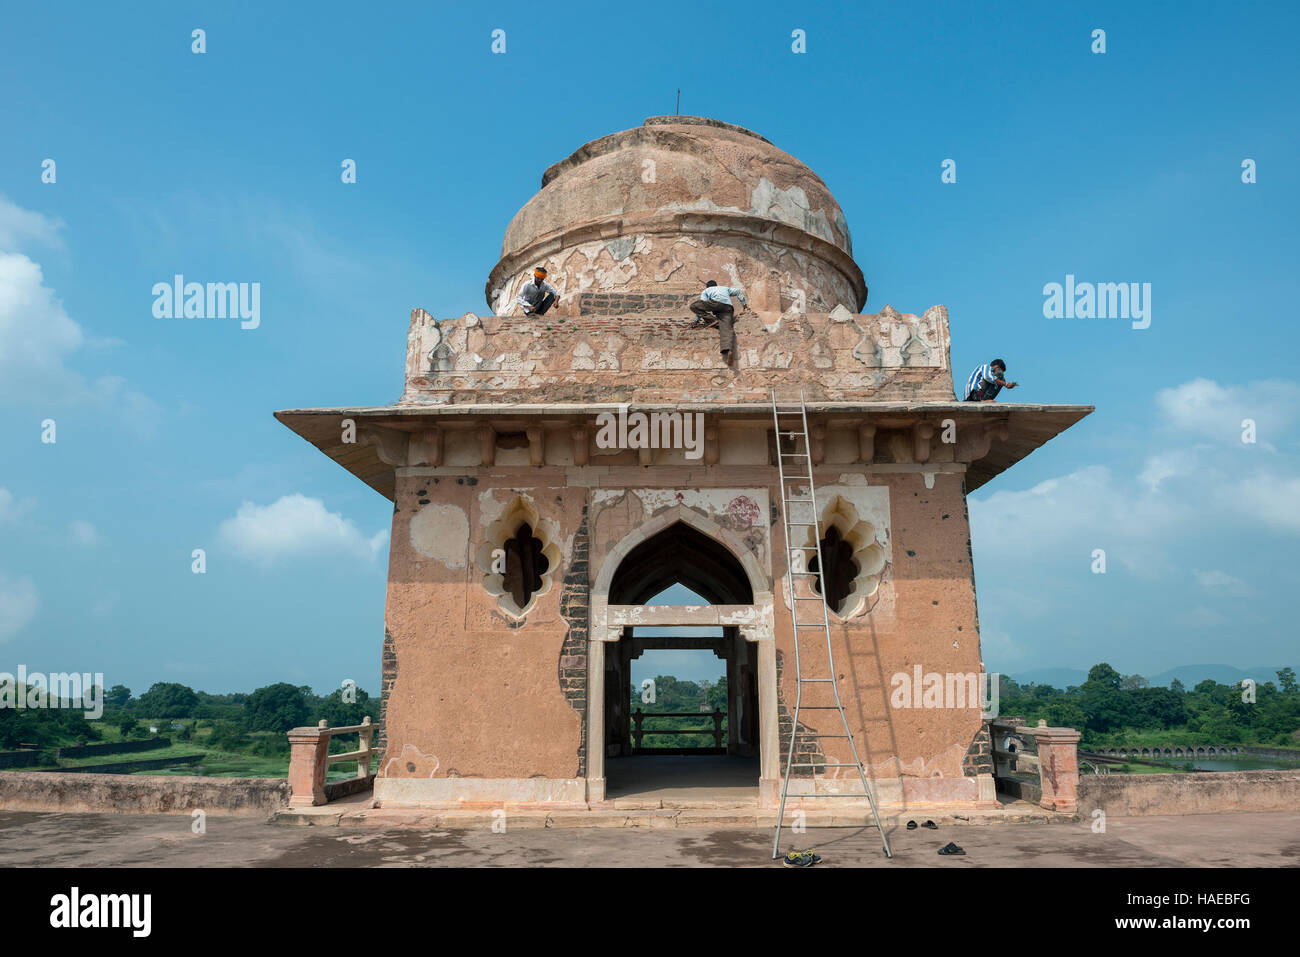 Repair work going on the Jahaz Mahal or 'Ship Palace' in the Royal Enclave is the main tourist attraction in Mandu, Madhya Pradesh, India Stock Photo